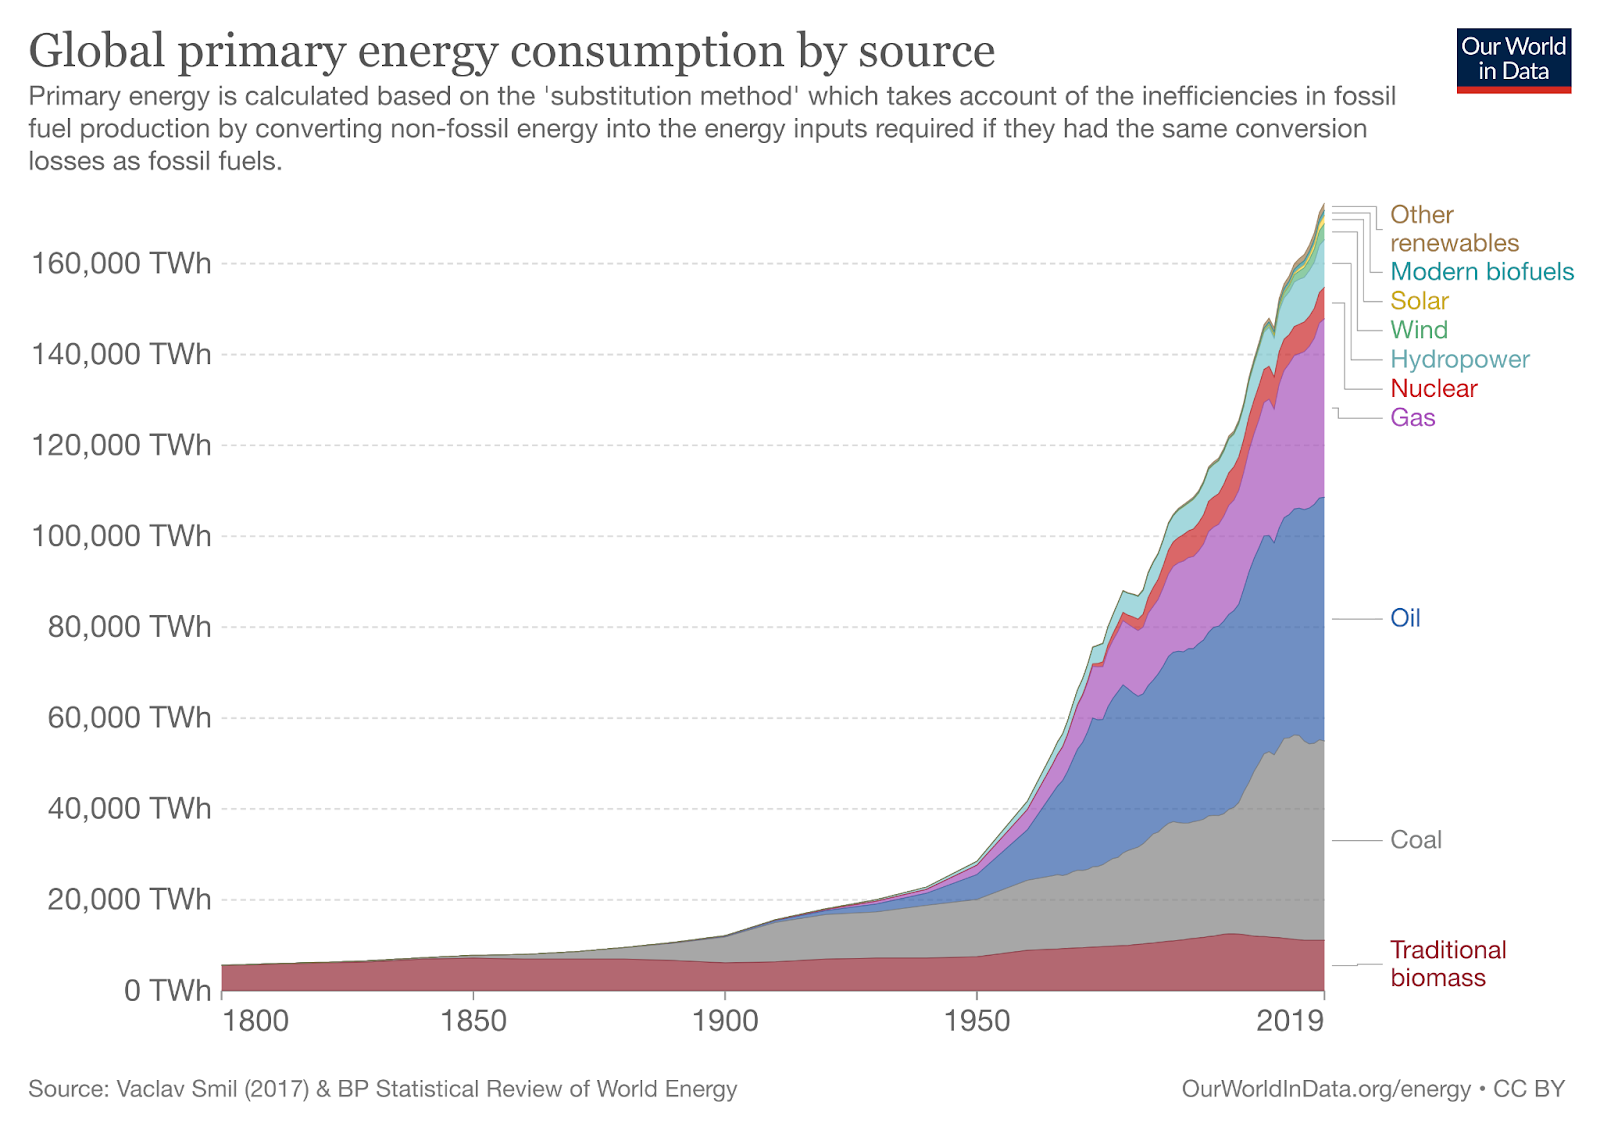 graph of global energy consumption since 1800 by source of energy